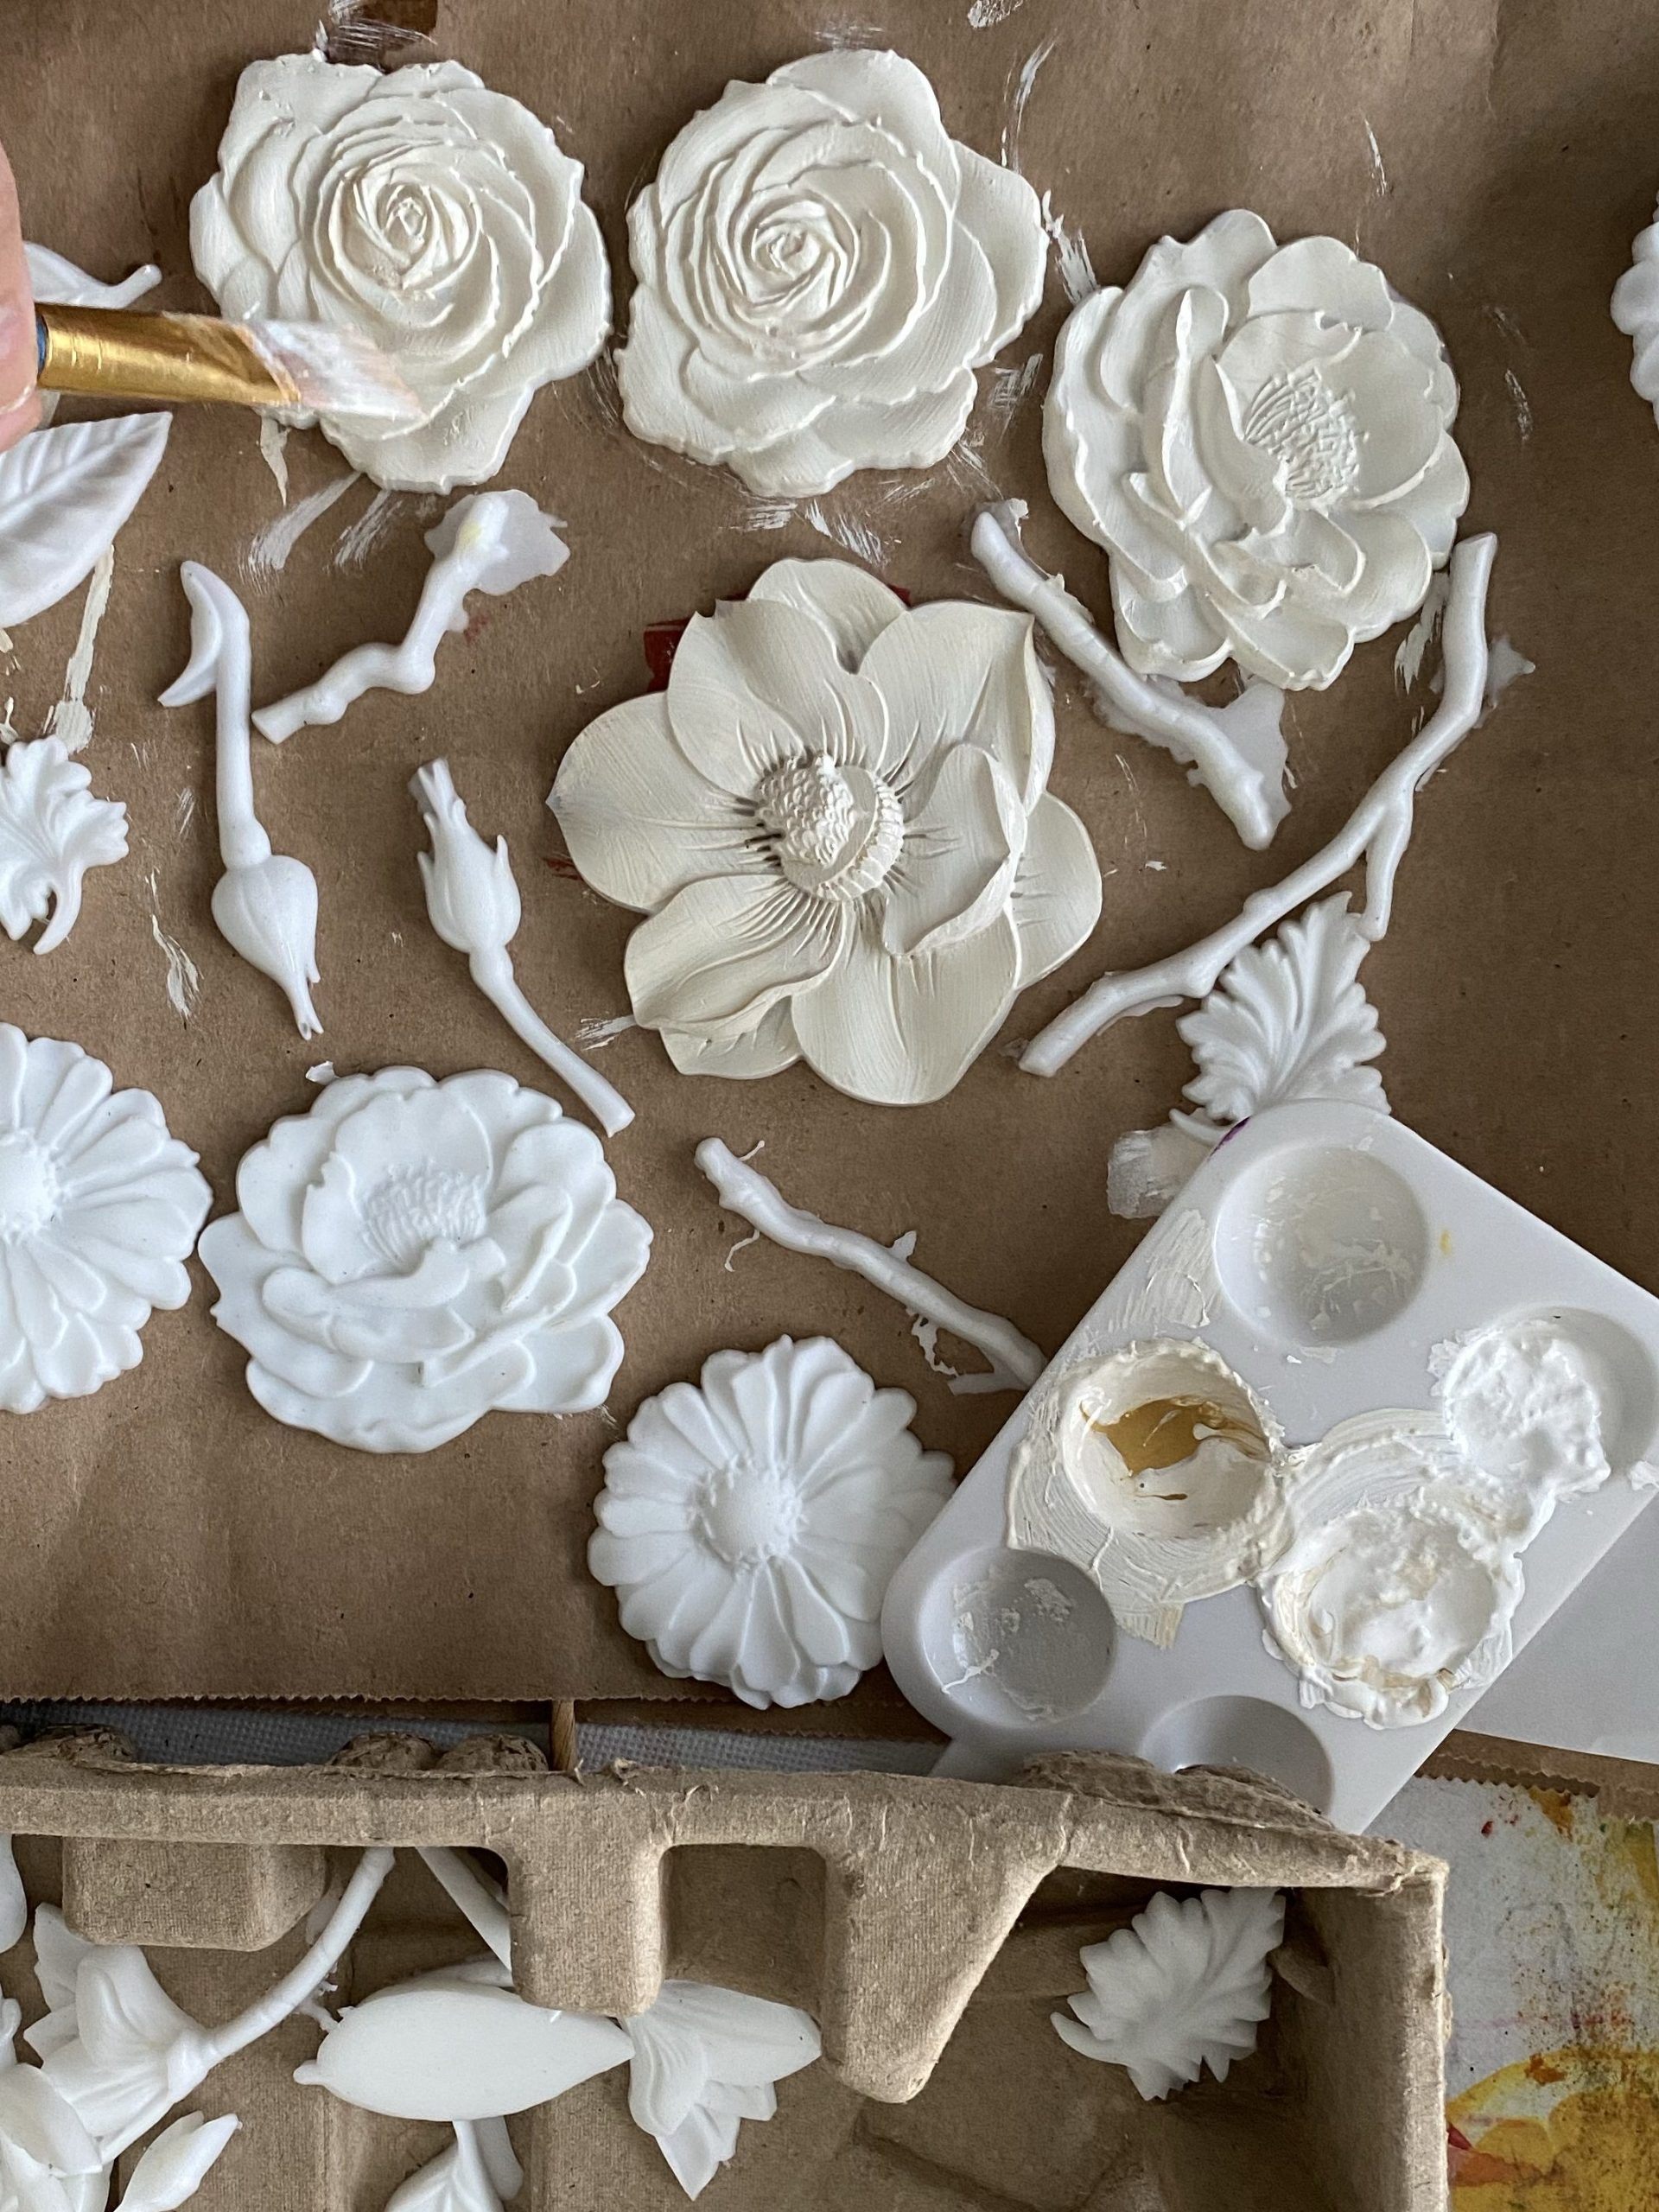 DIY Dresser Makeover - Resin flowers painted white with craft paint